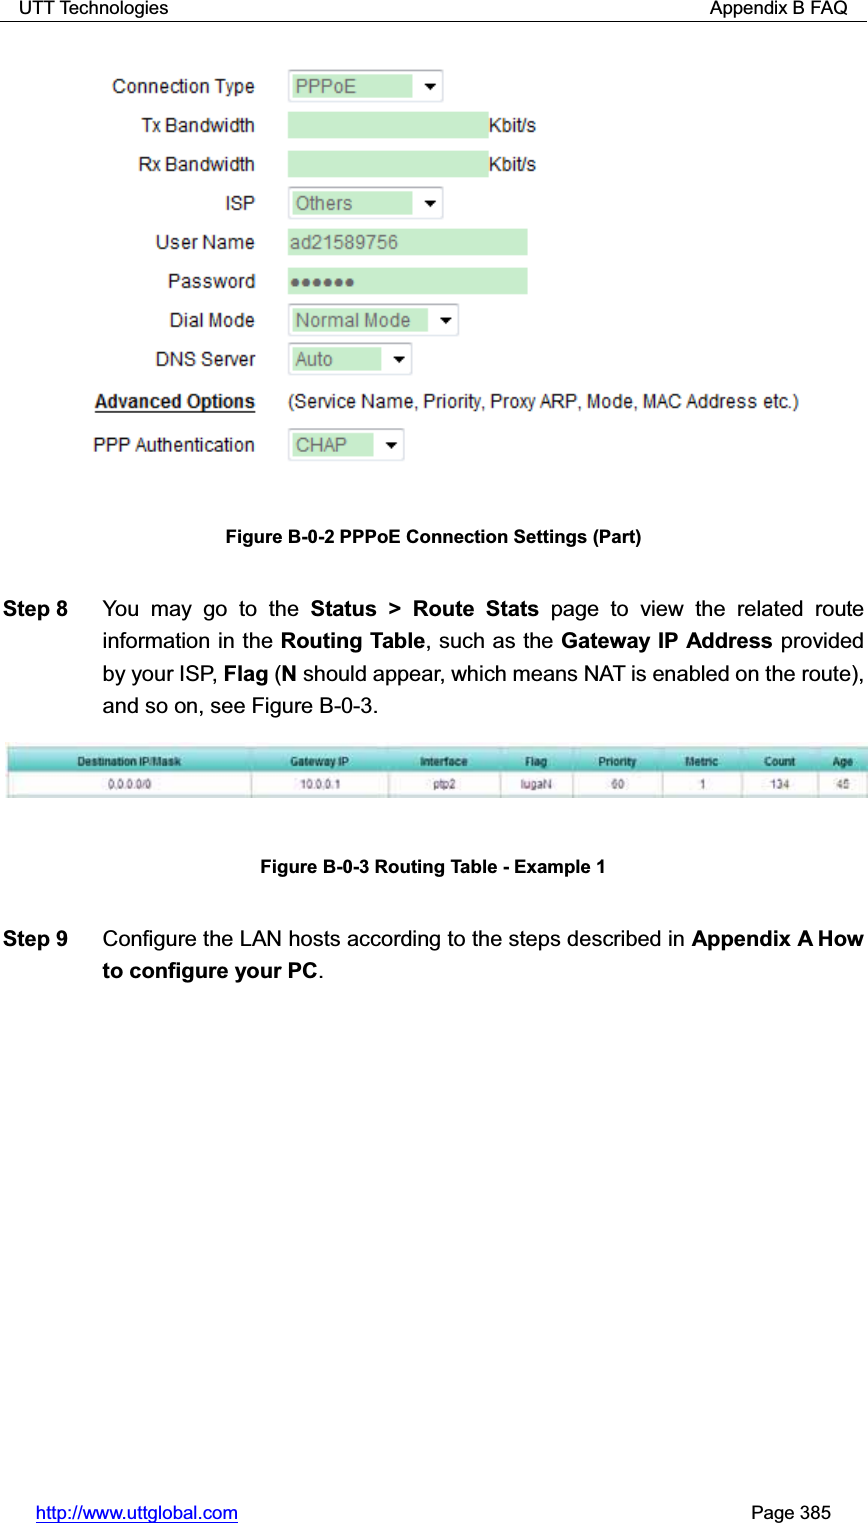 UTT Technologies                                                          Appendix B FAQ http://www.uttglobal.com                                                       Page 385 Figure B-0-2 PPPoE Connection Settings (Part) Step 8  You may go to the Status &gt; Route Stats page to view the related route information in the Routing Table, such as the Gateway IP Address provided by your ISP, Flag (N should appear, which means NAT is enabled on the route), and so on, see Figure B-0-3. Figure B-0-3 Routing Table - Example 1 Step 9  Configure the LAN hosts according to the steps described in Appendix A How to configure your PC.